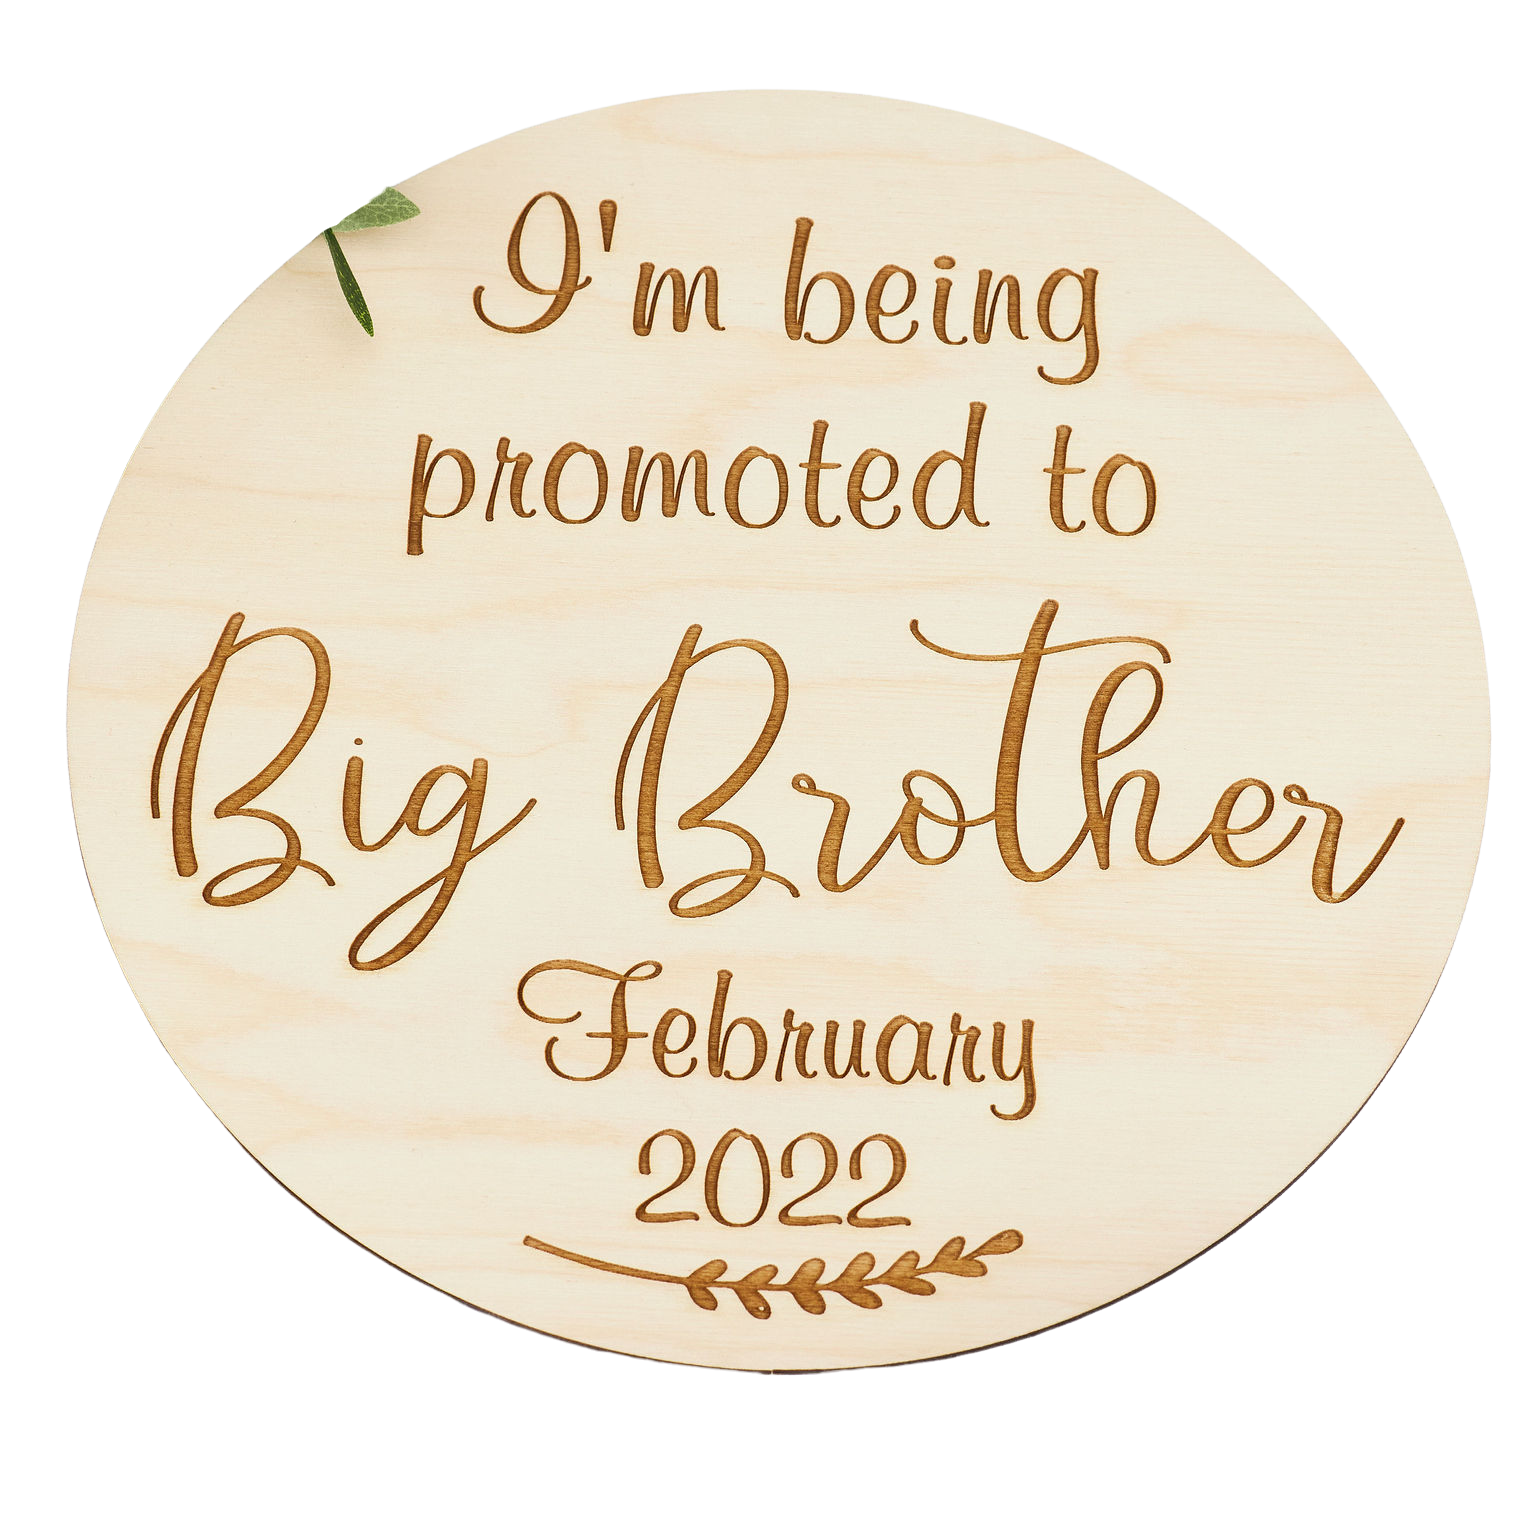 "I'm Being Promoted to Big Brother/Sister" Plaque Promoted Miss Ali's   